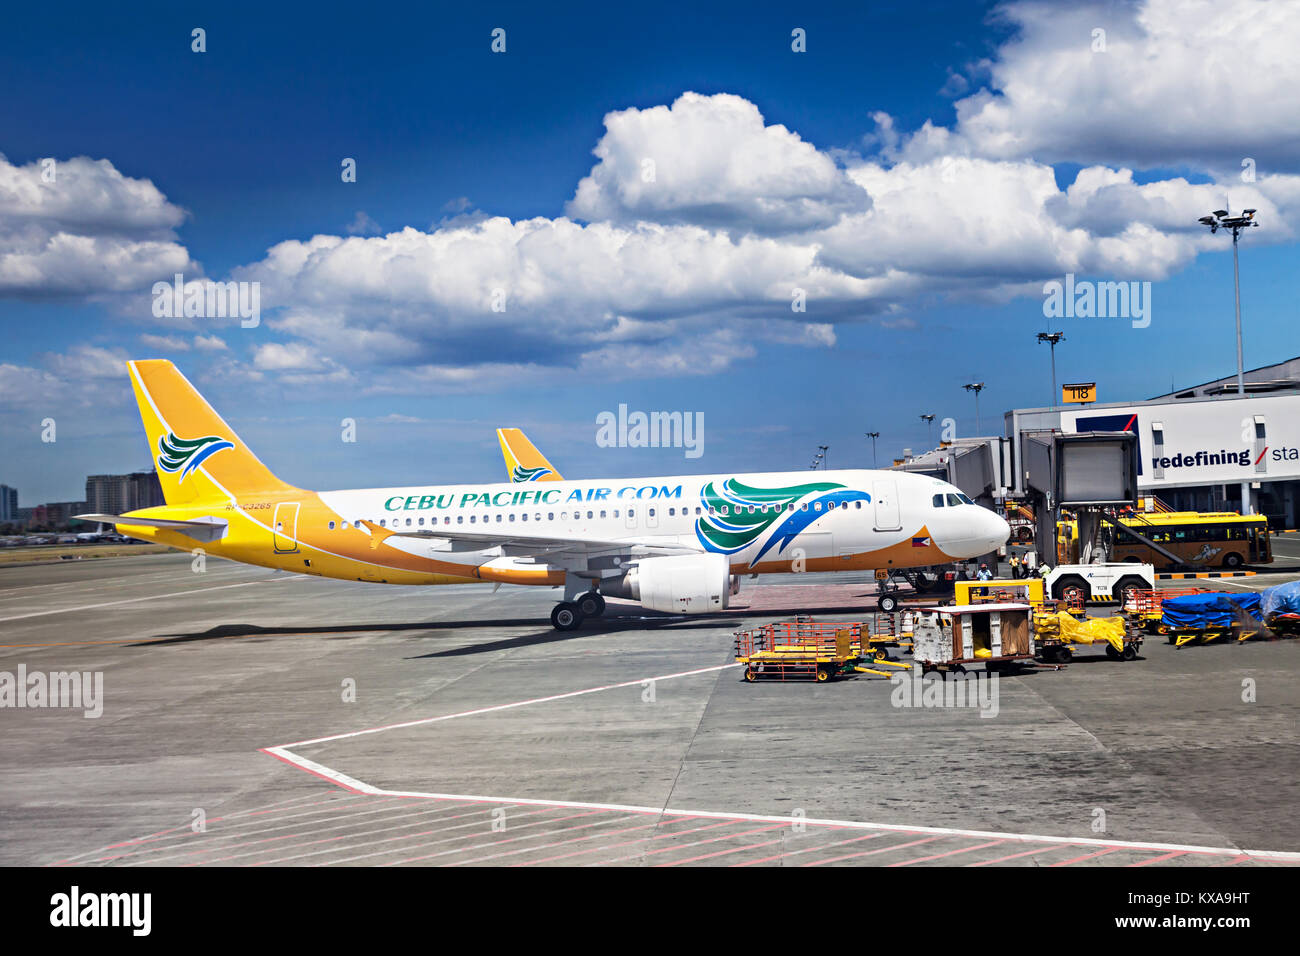 MANILA, PHILIPPINES - FEBRUARY 24: Cebu Pacific airpane in Manila airport on February, 24, 2013, Manila, Philippines. Its airline based on the grounds Stock Photo